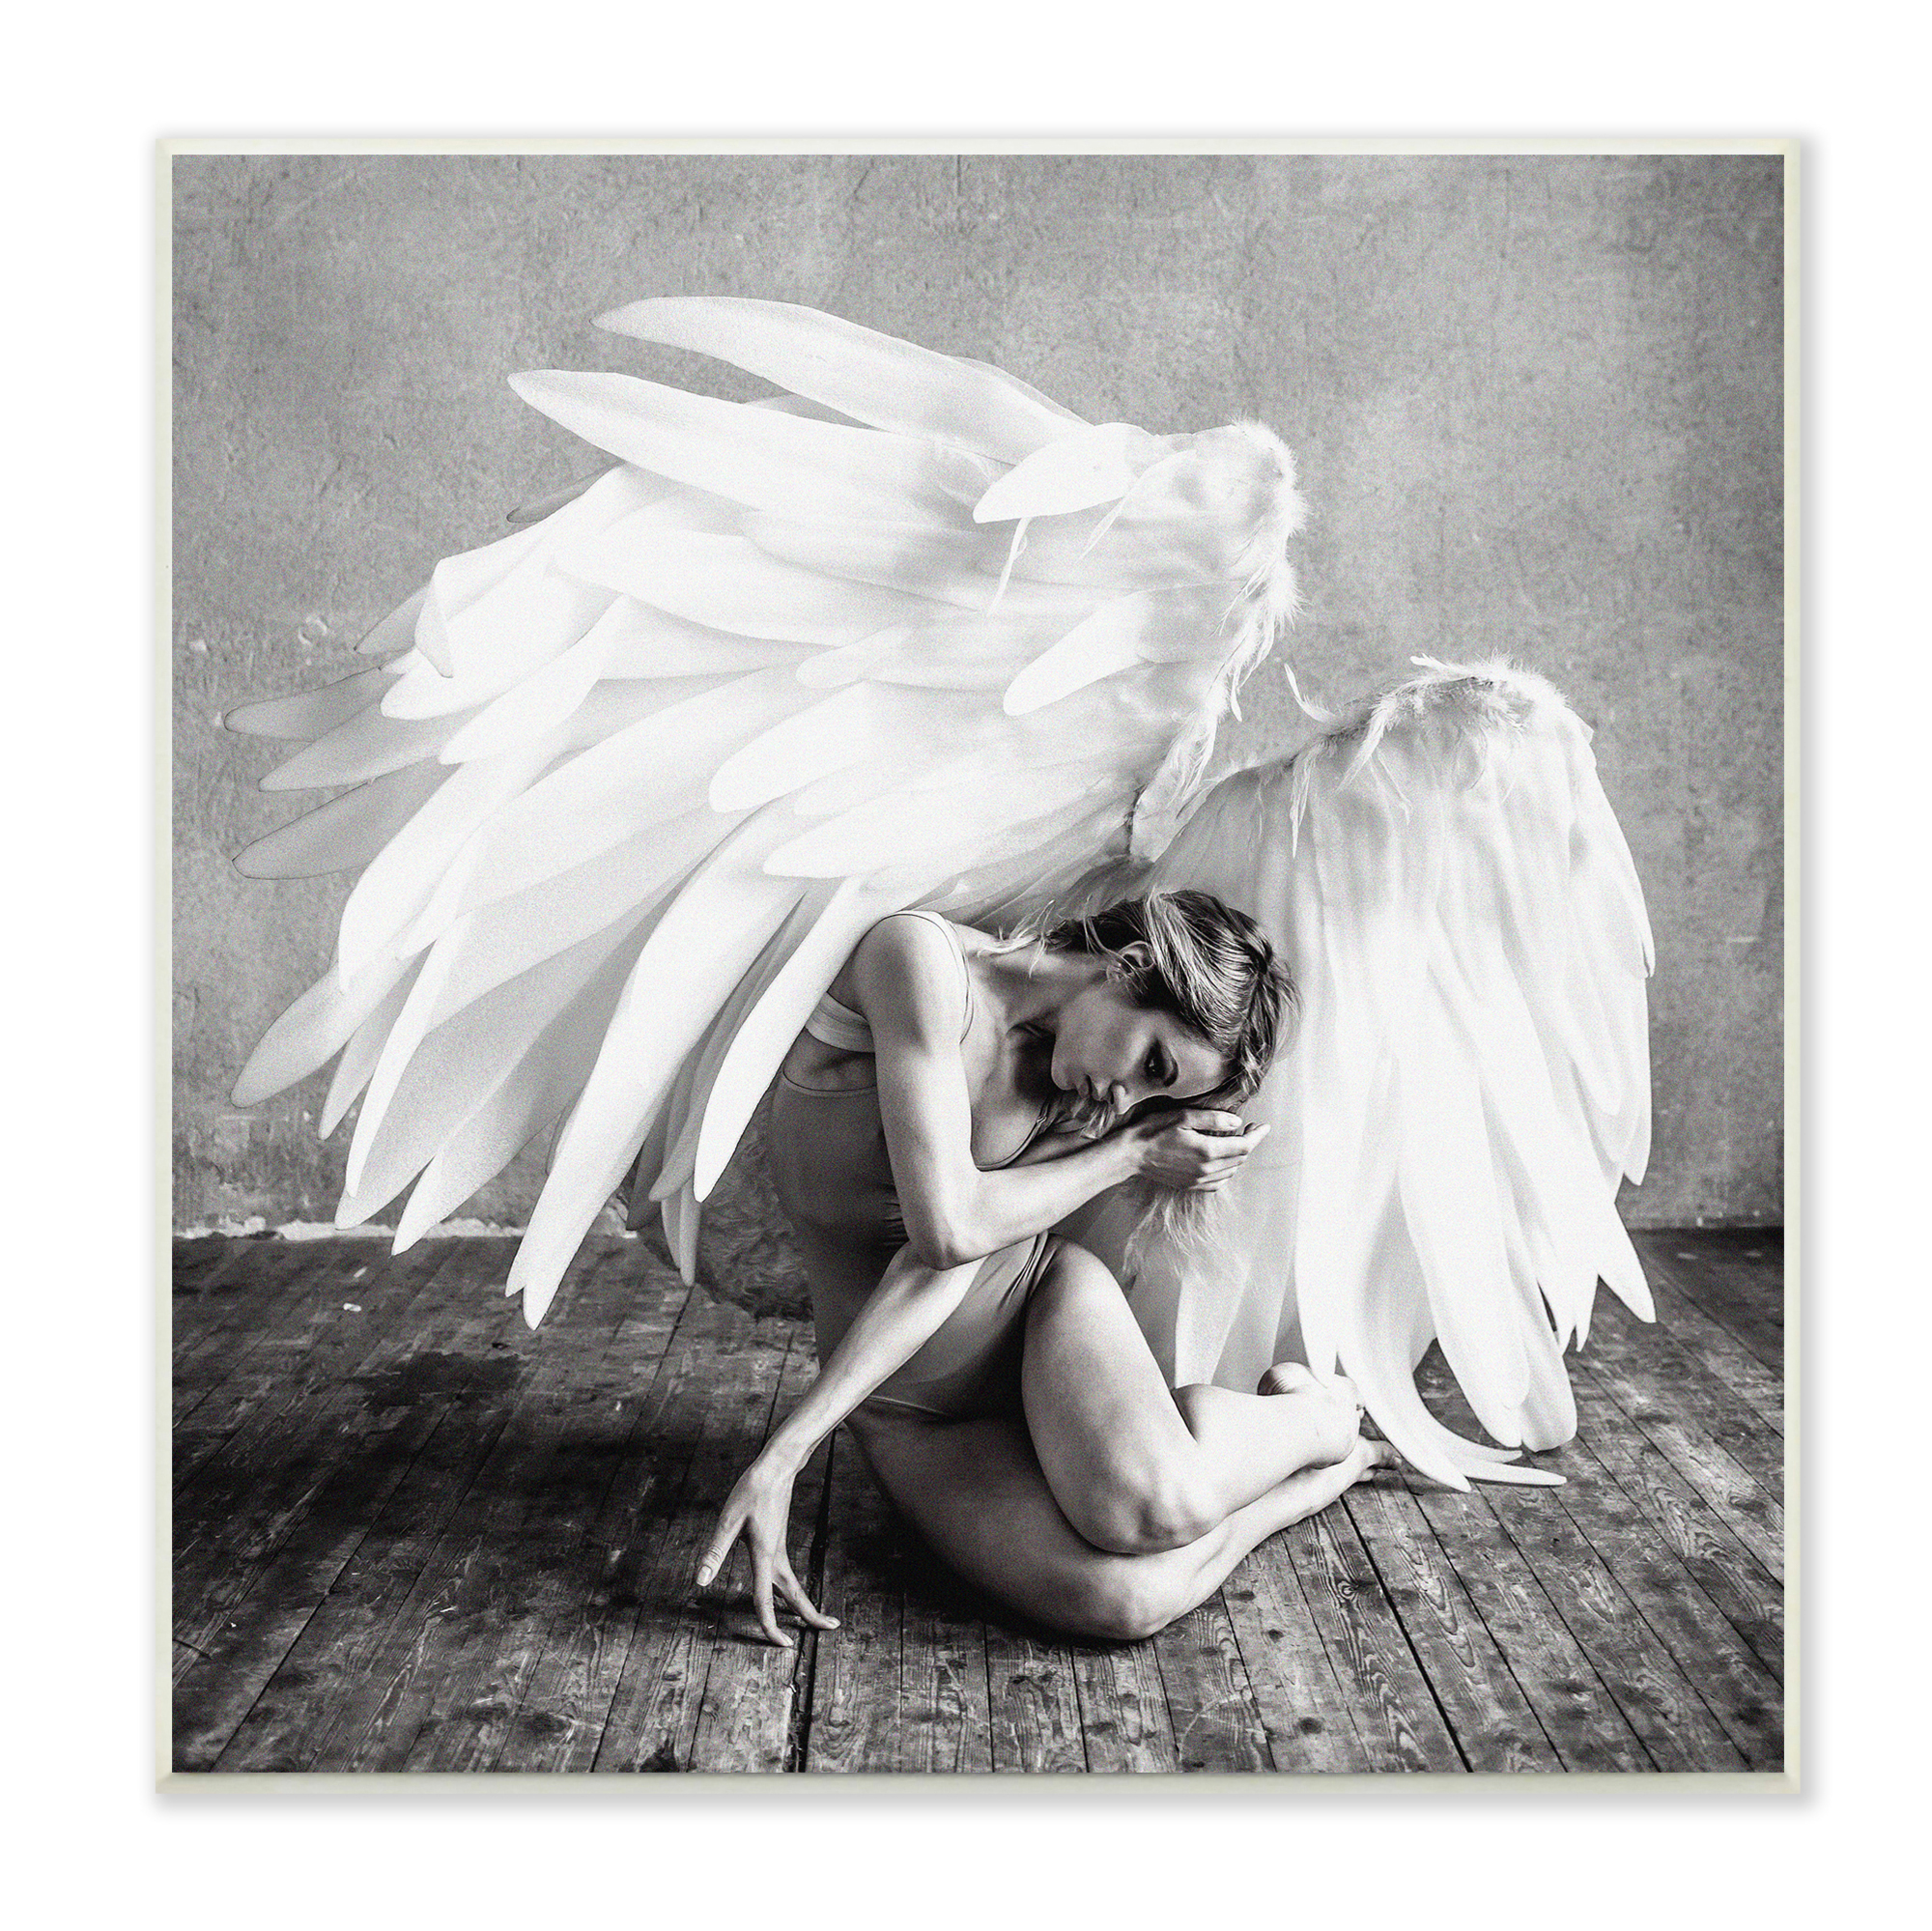 Stupell Industries Magical White Angel Wings Woman Monochrome Photography Wood Wall Art, 12 x 12, Design by Nicholas Ivins - image 1 of 4